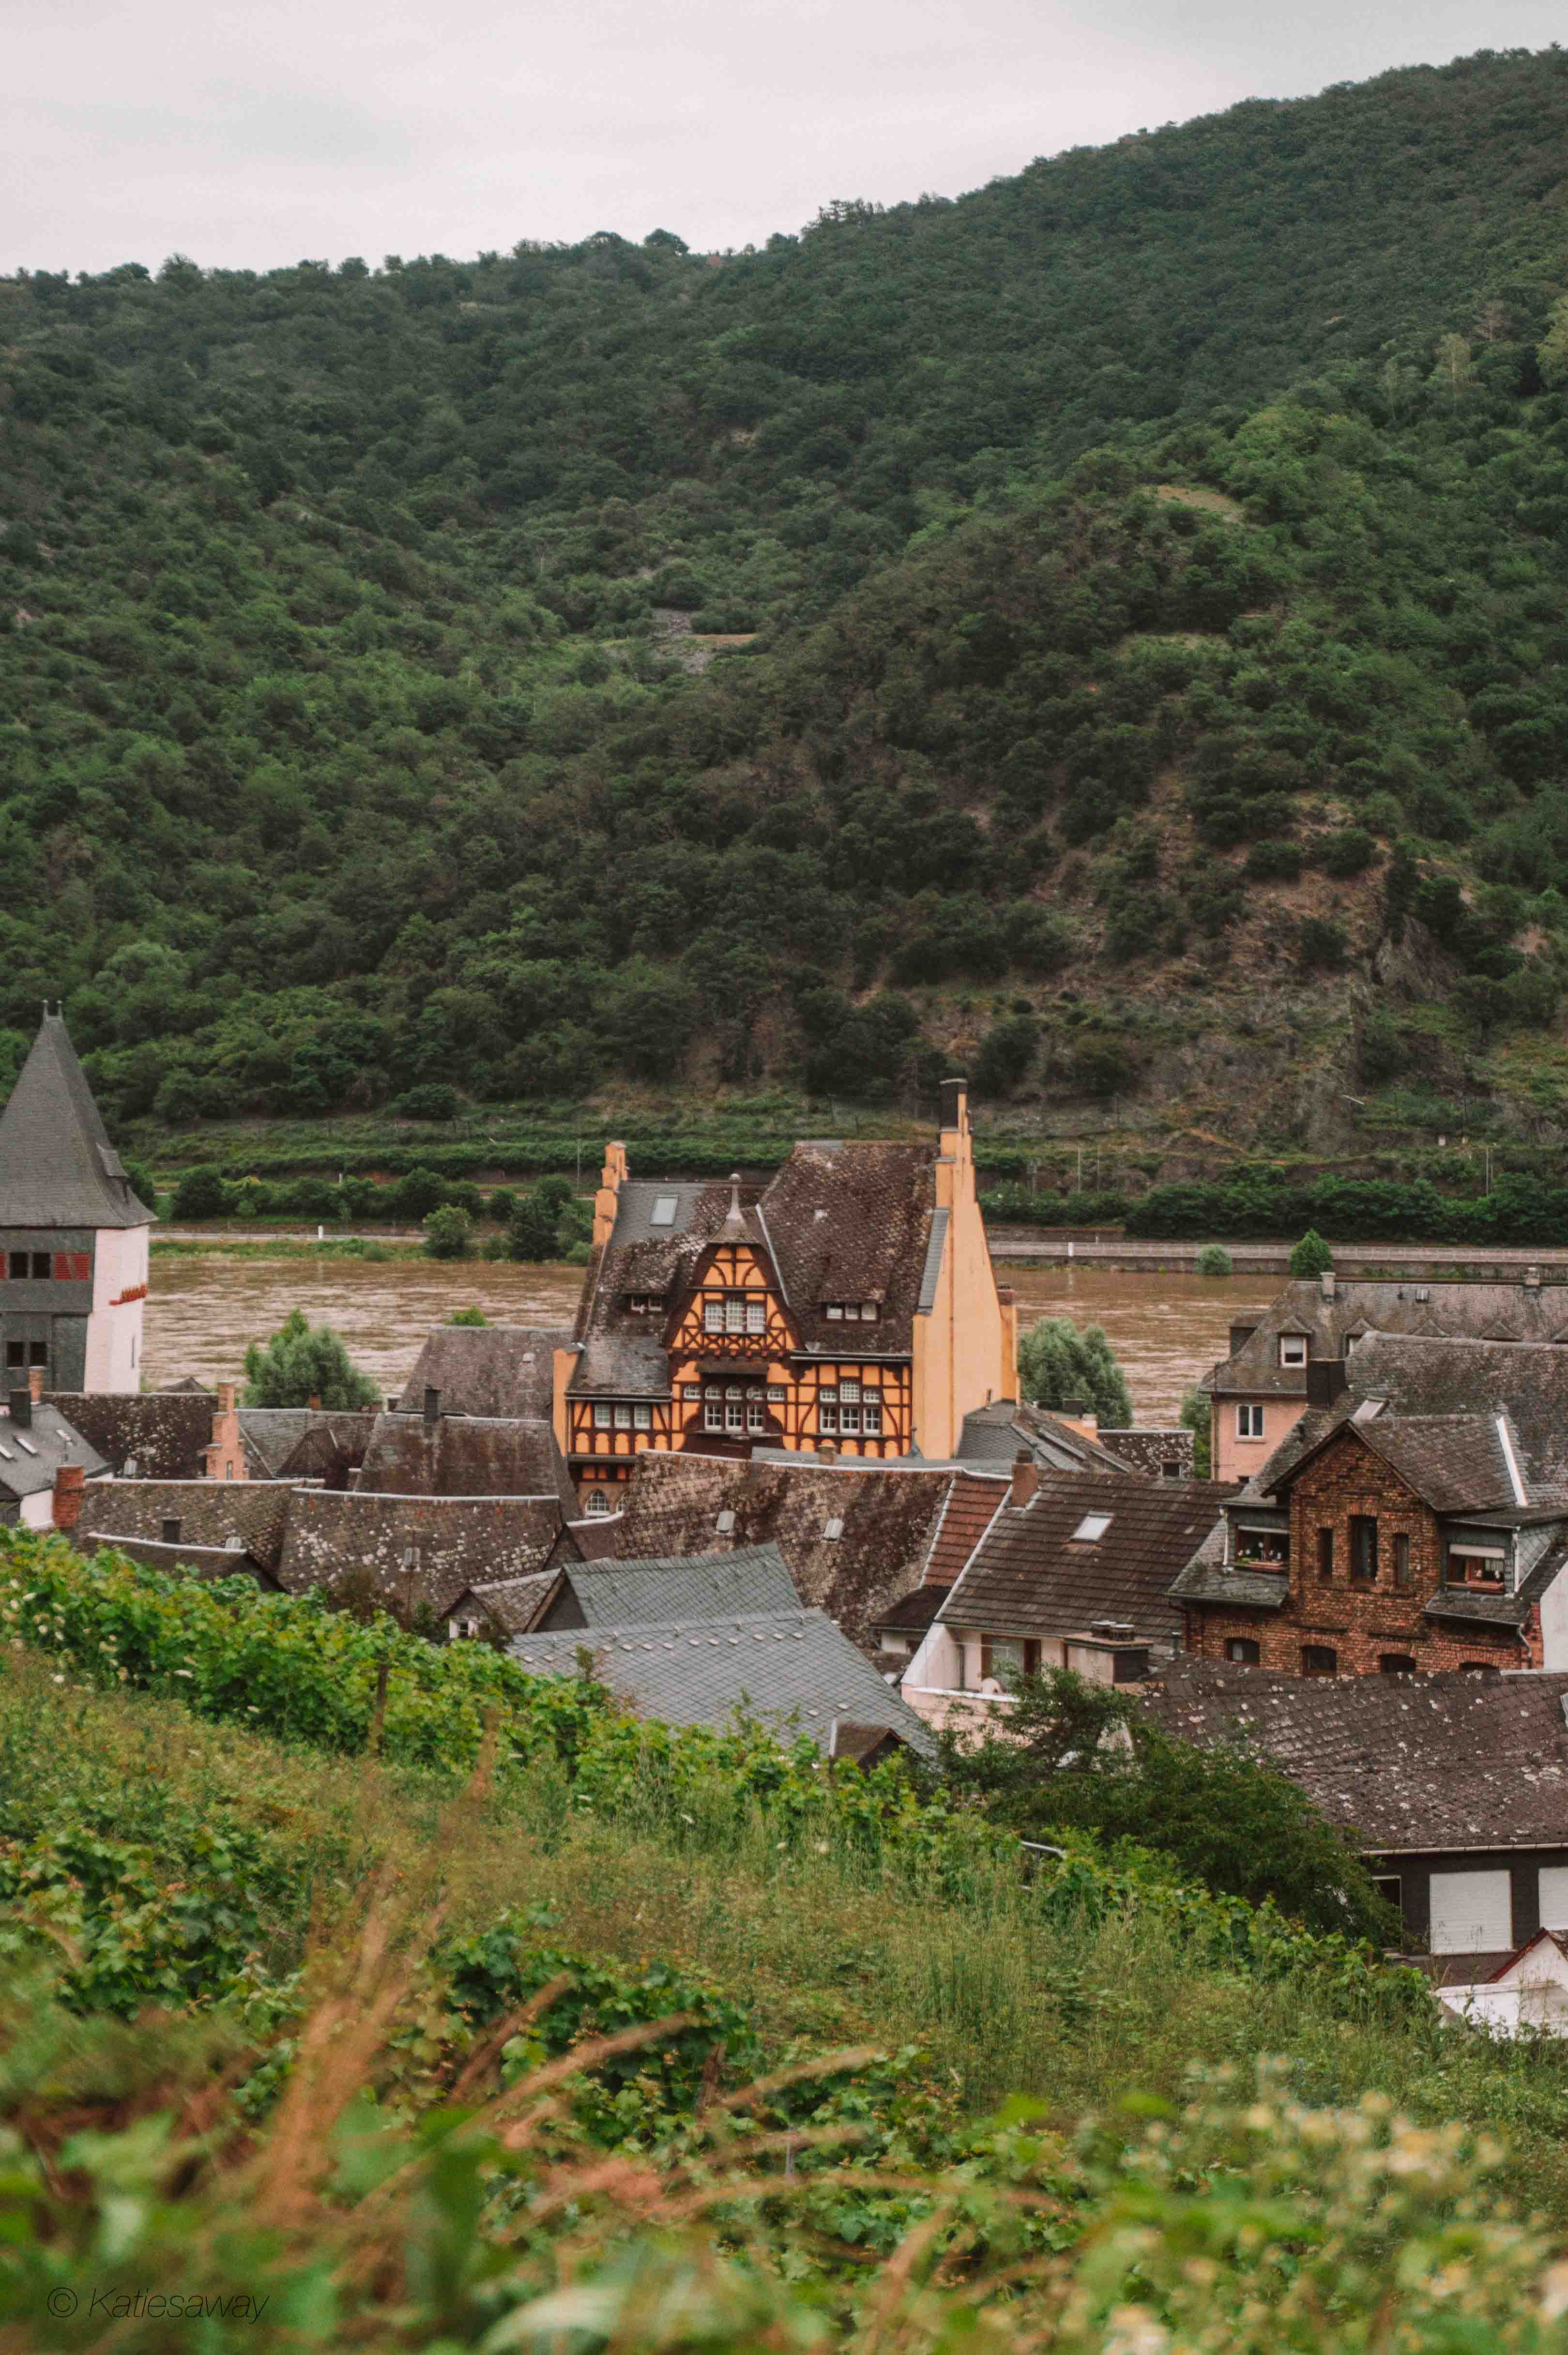 Postenturm - view of bacharach and rhine river